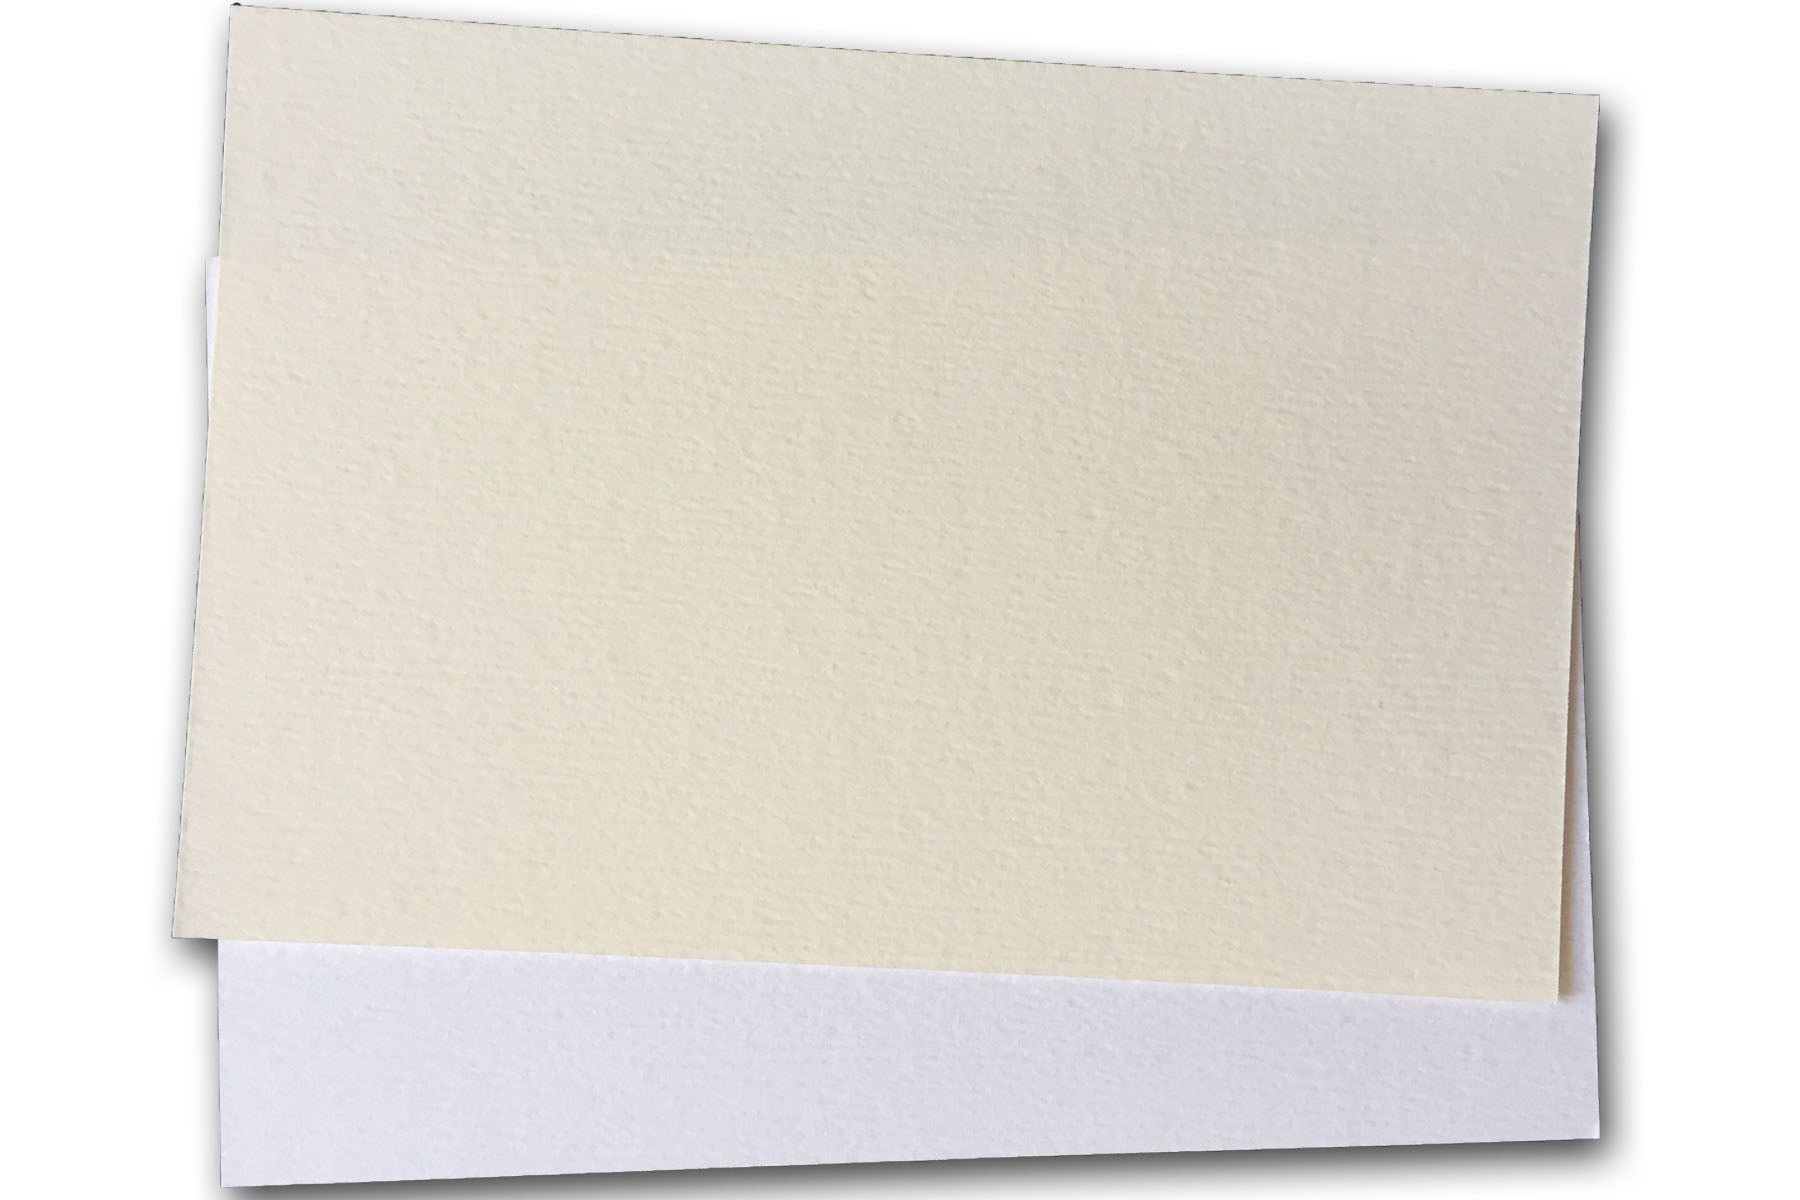 Soft White Felt Finish 4x6 inch discount cardstock for stamping -  CutCardStock